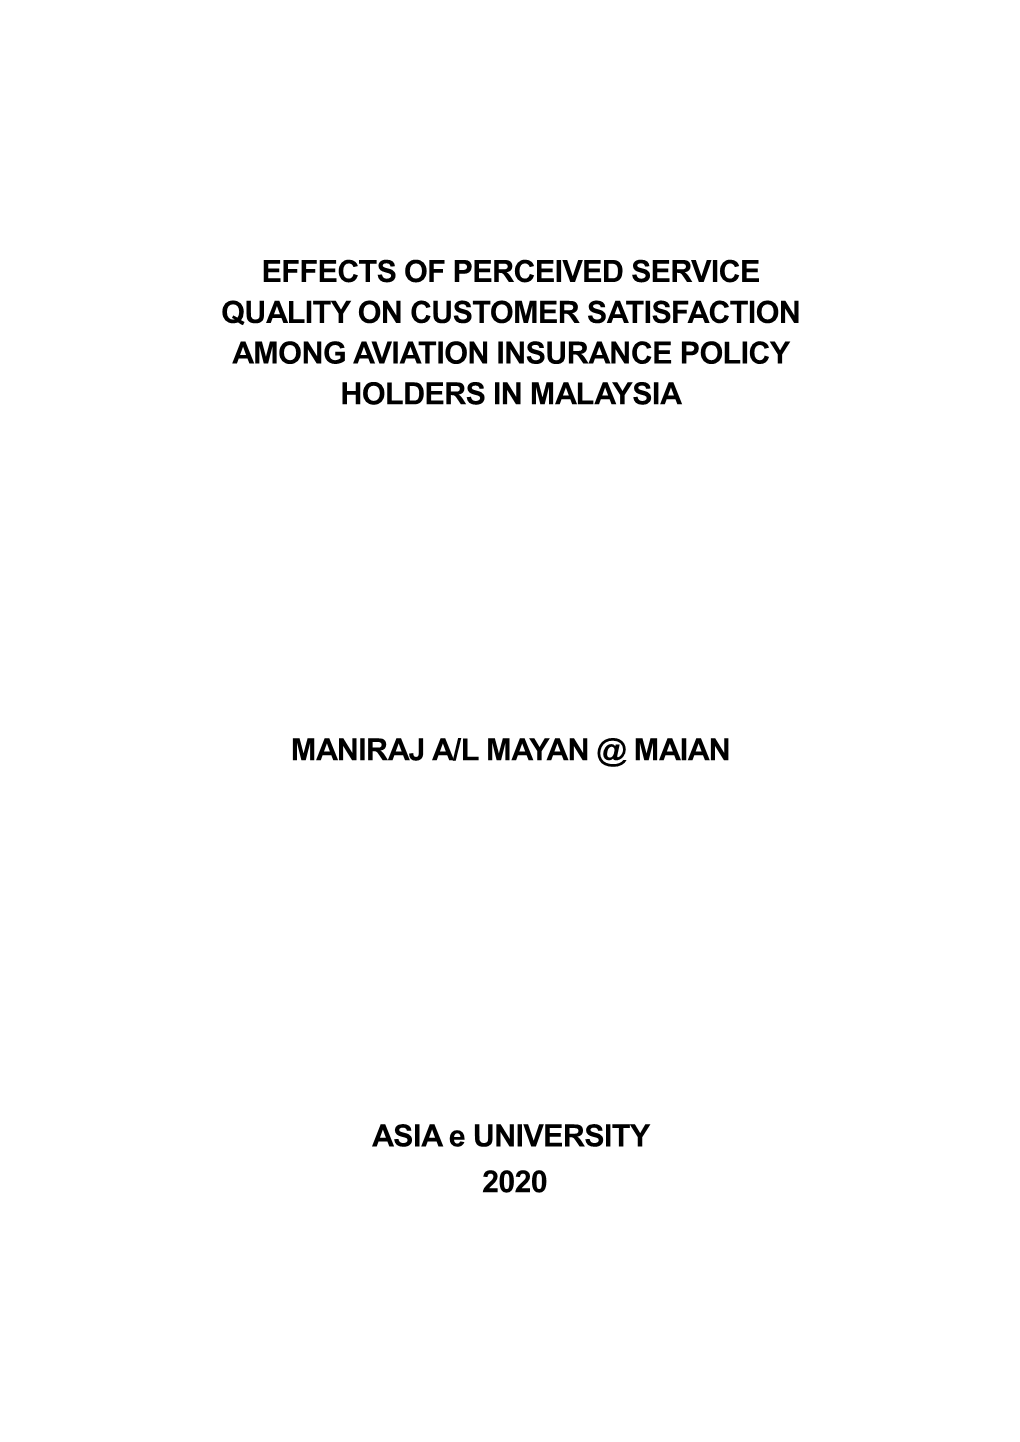 Effects of Perceived Service Quality on Customer Satisfaction Among Aviation Insurance Policy Holders in Malaysia